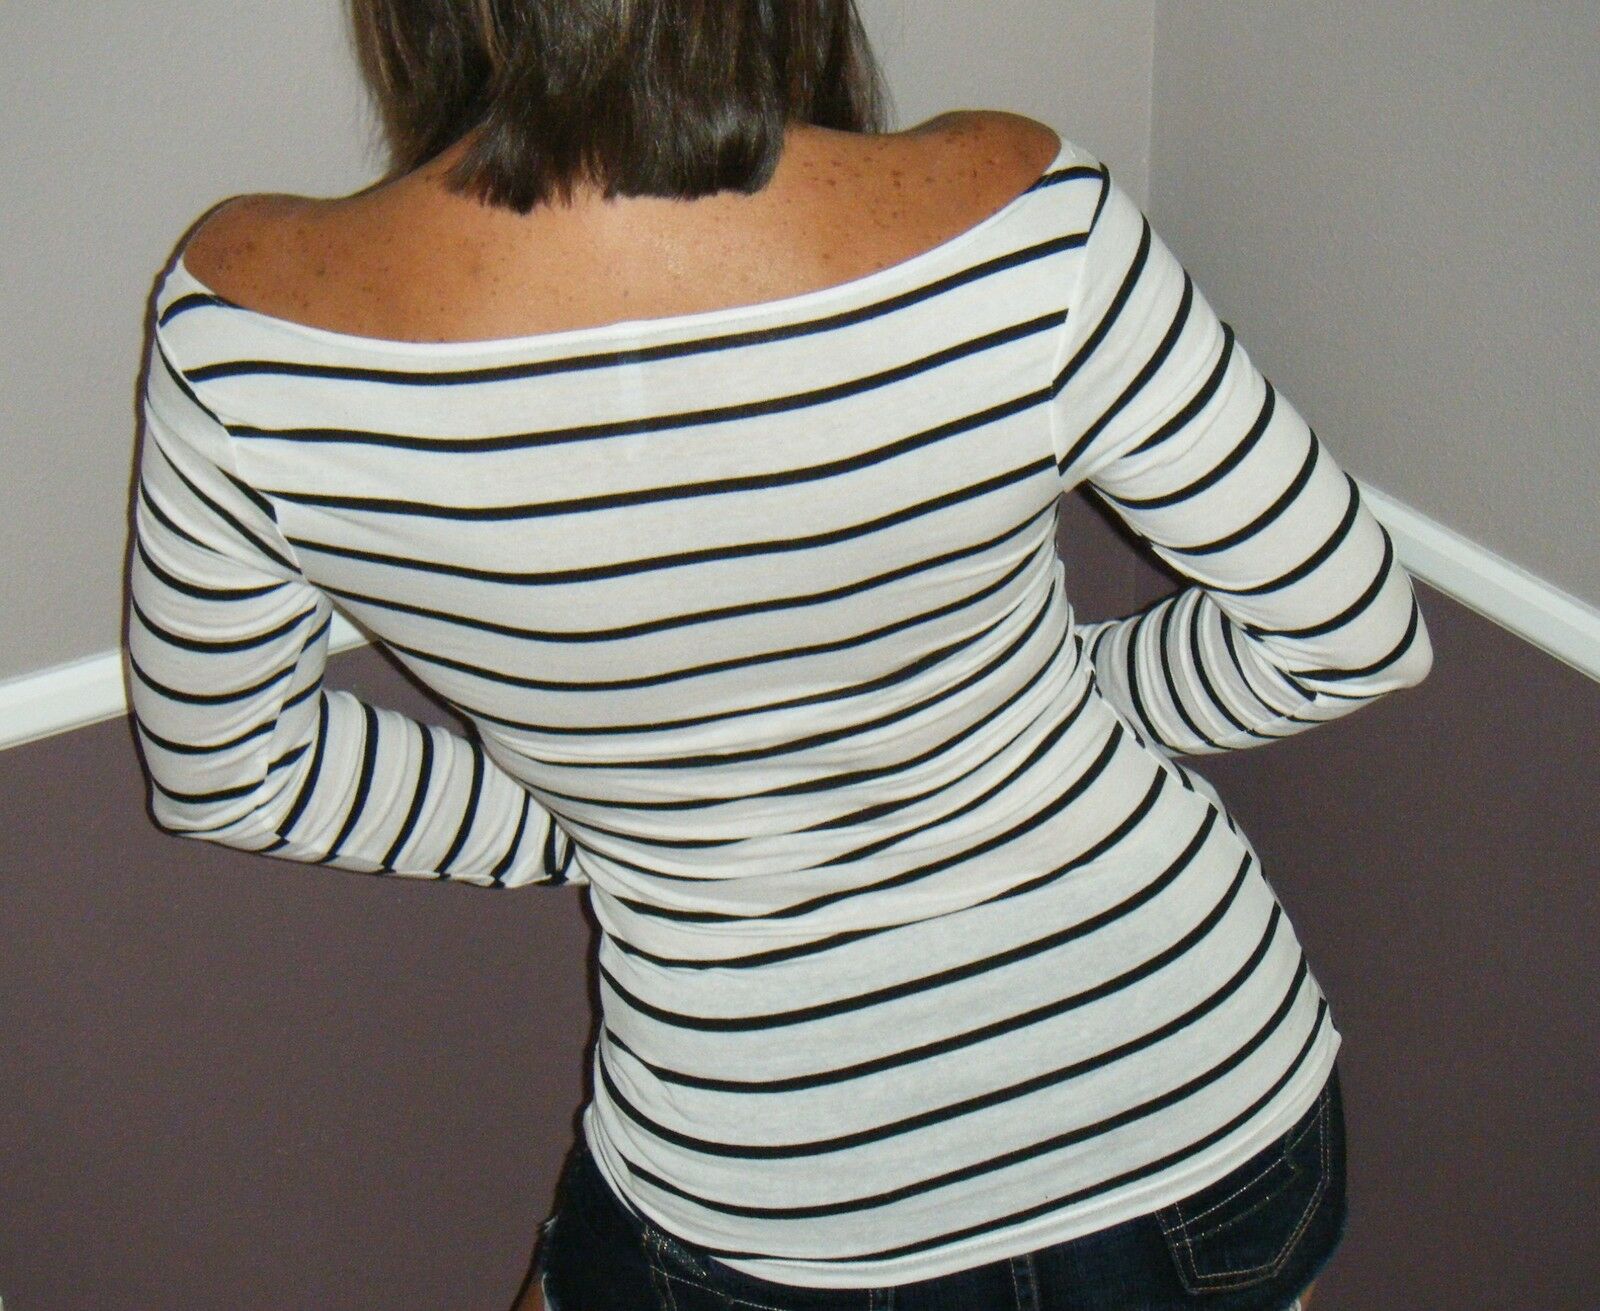 Sexy Boat Neck Preppy Striped Rugby Open Shoulder Stretch Shirt Top White S/M/L